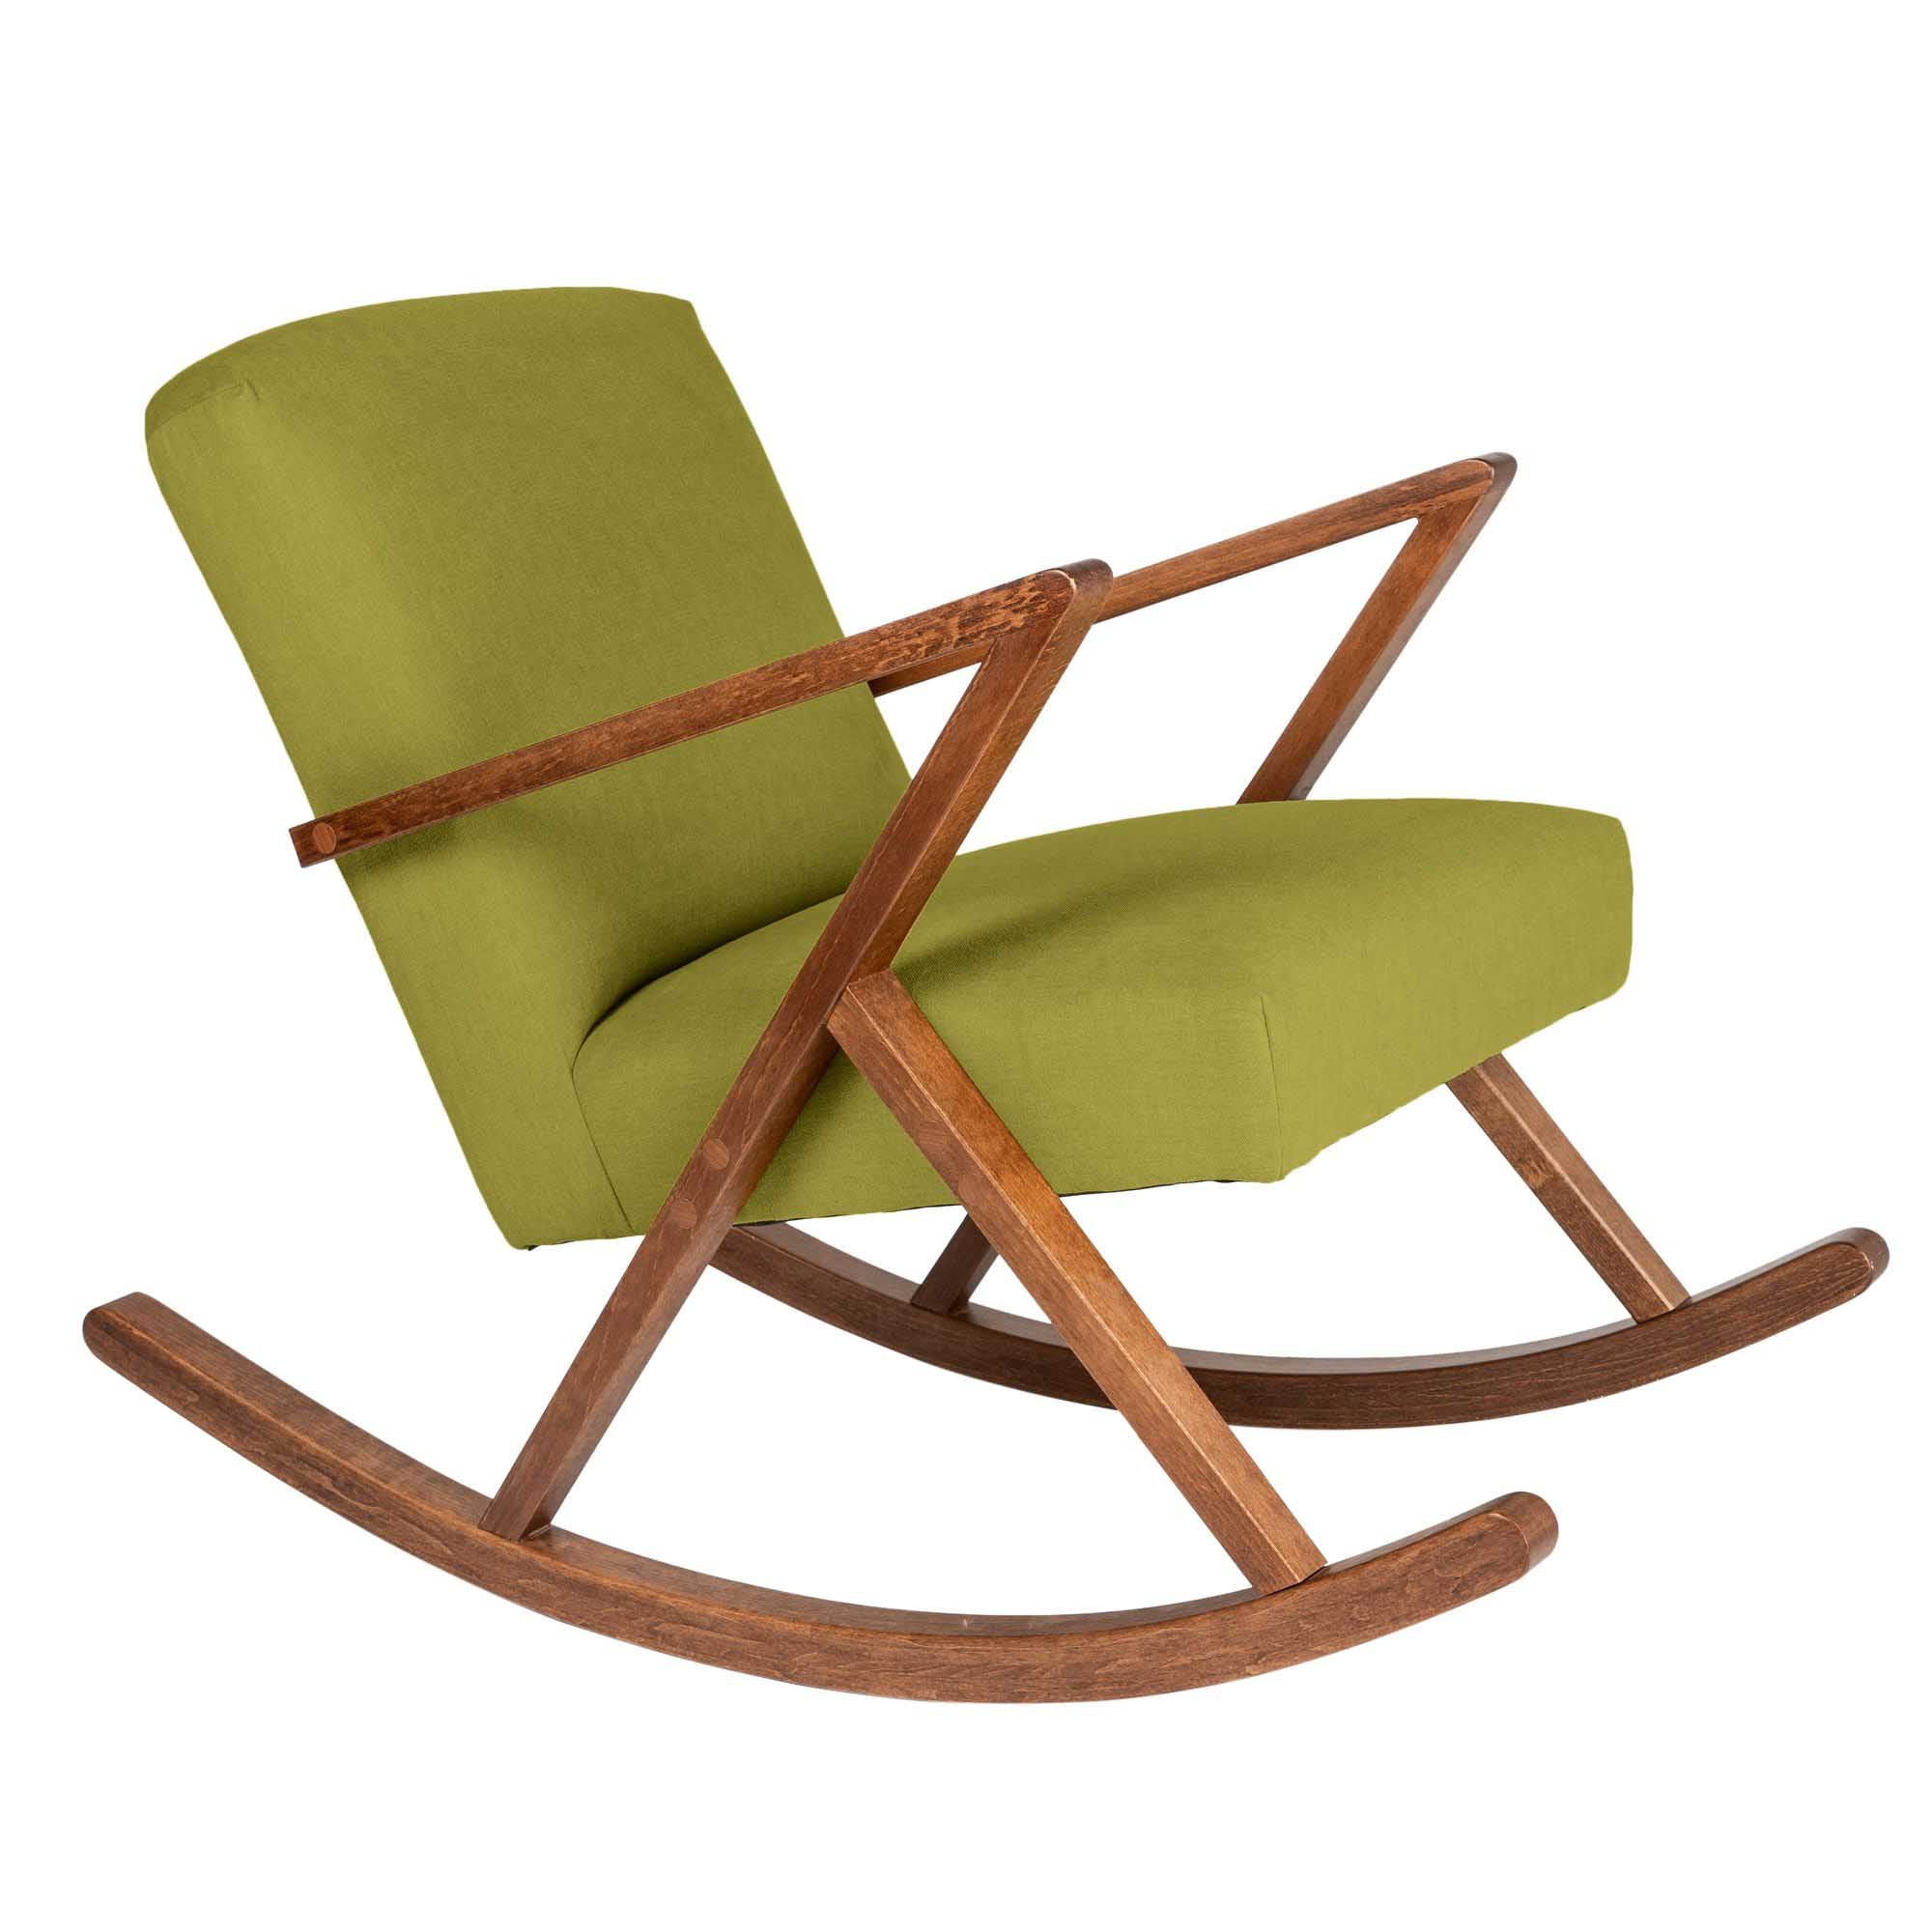  Rocking Chair, Beech Wood Frame, Walnut Colour green fabric, right side view